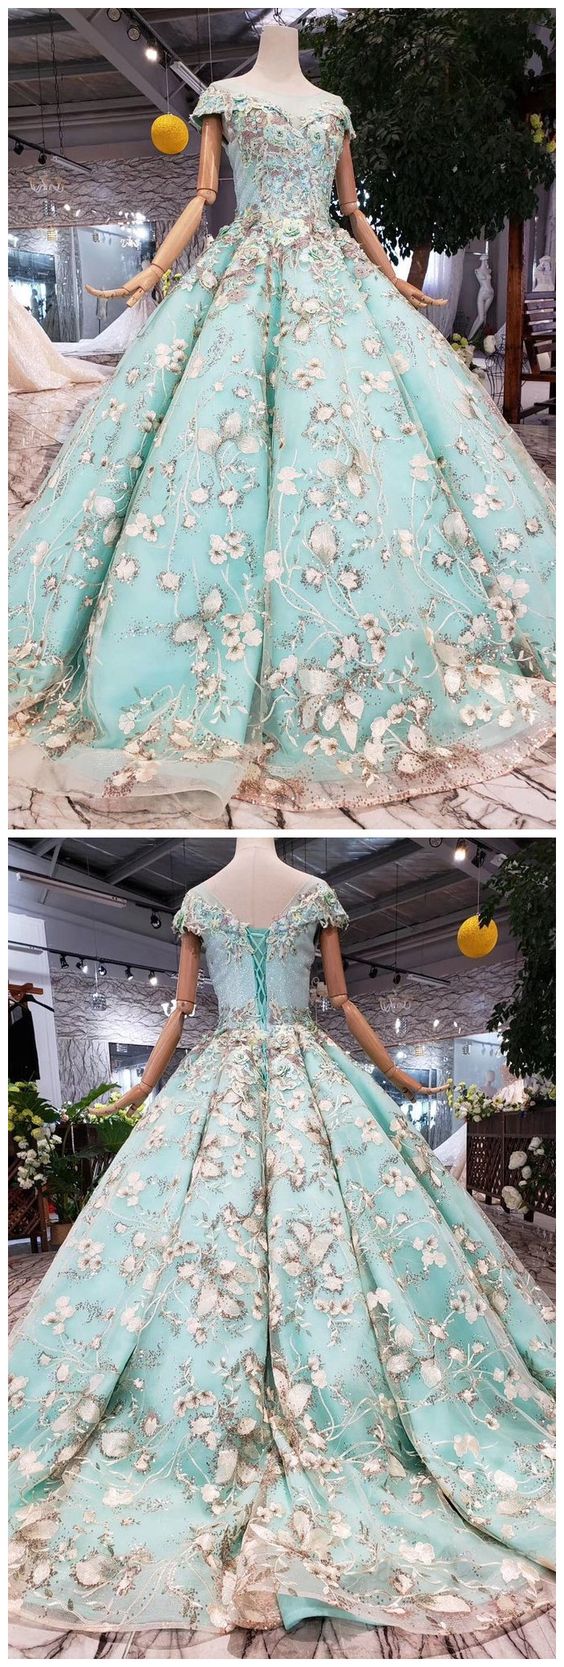 Big Sheer Neck Puffy Prom Dress With Cap Sleeves, Fairy Tale Lace Dress With Beading,pl2239